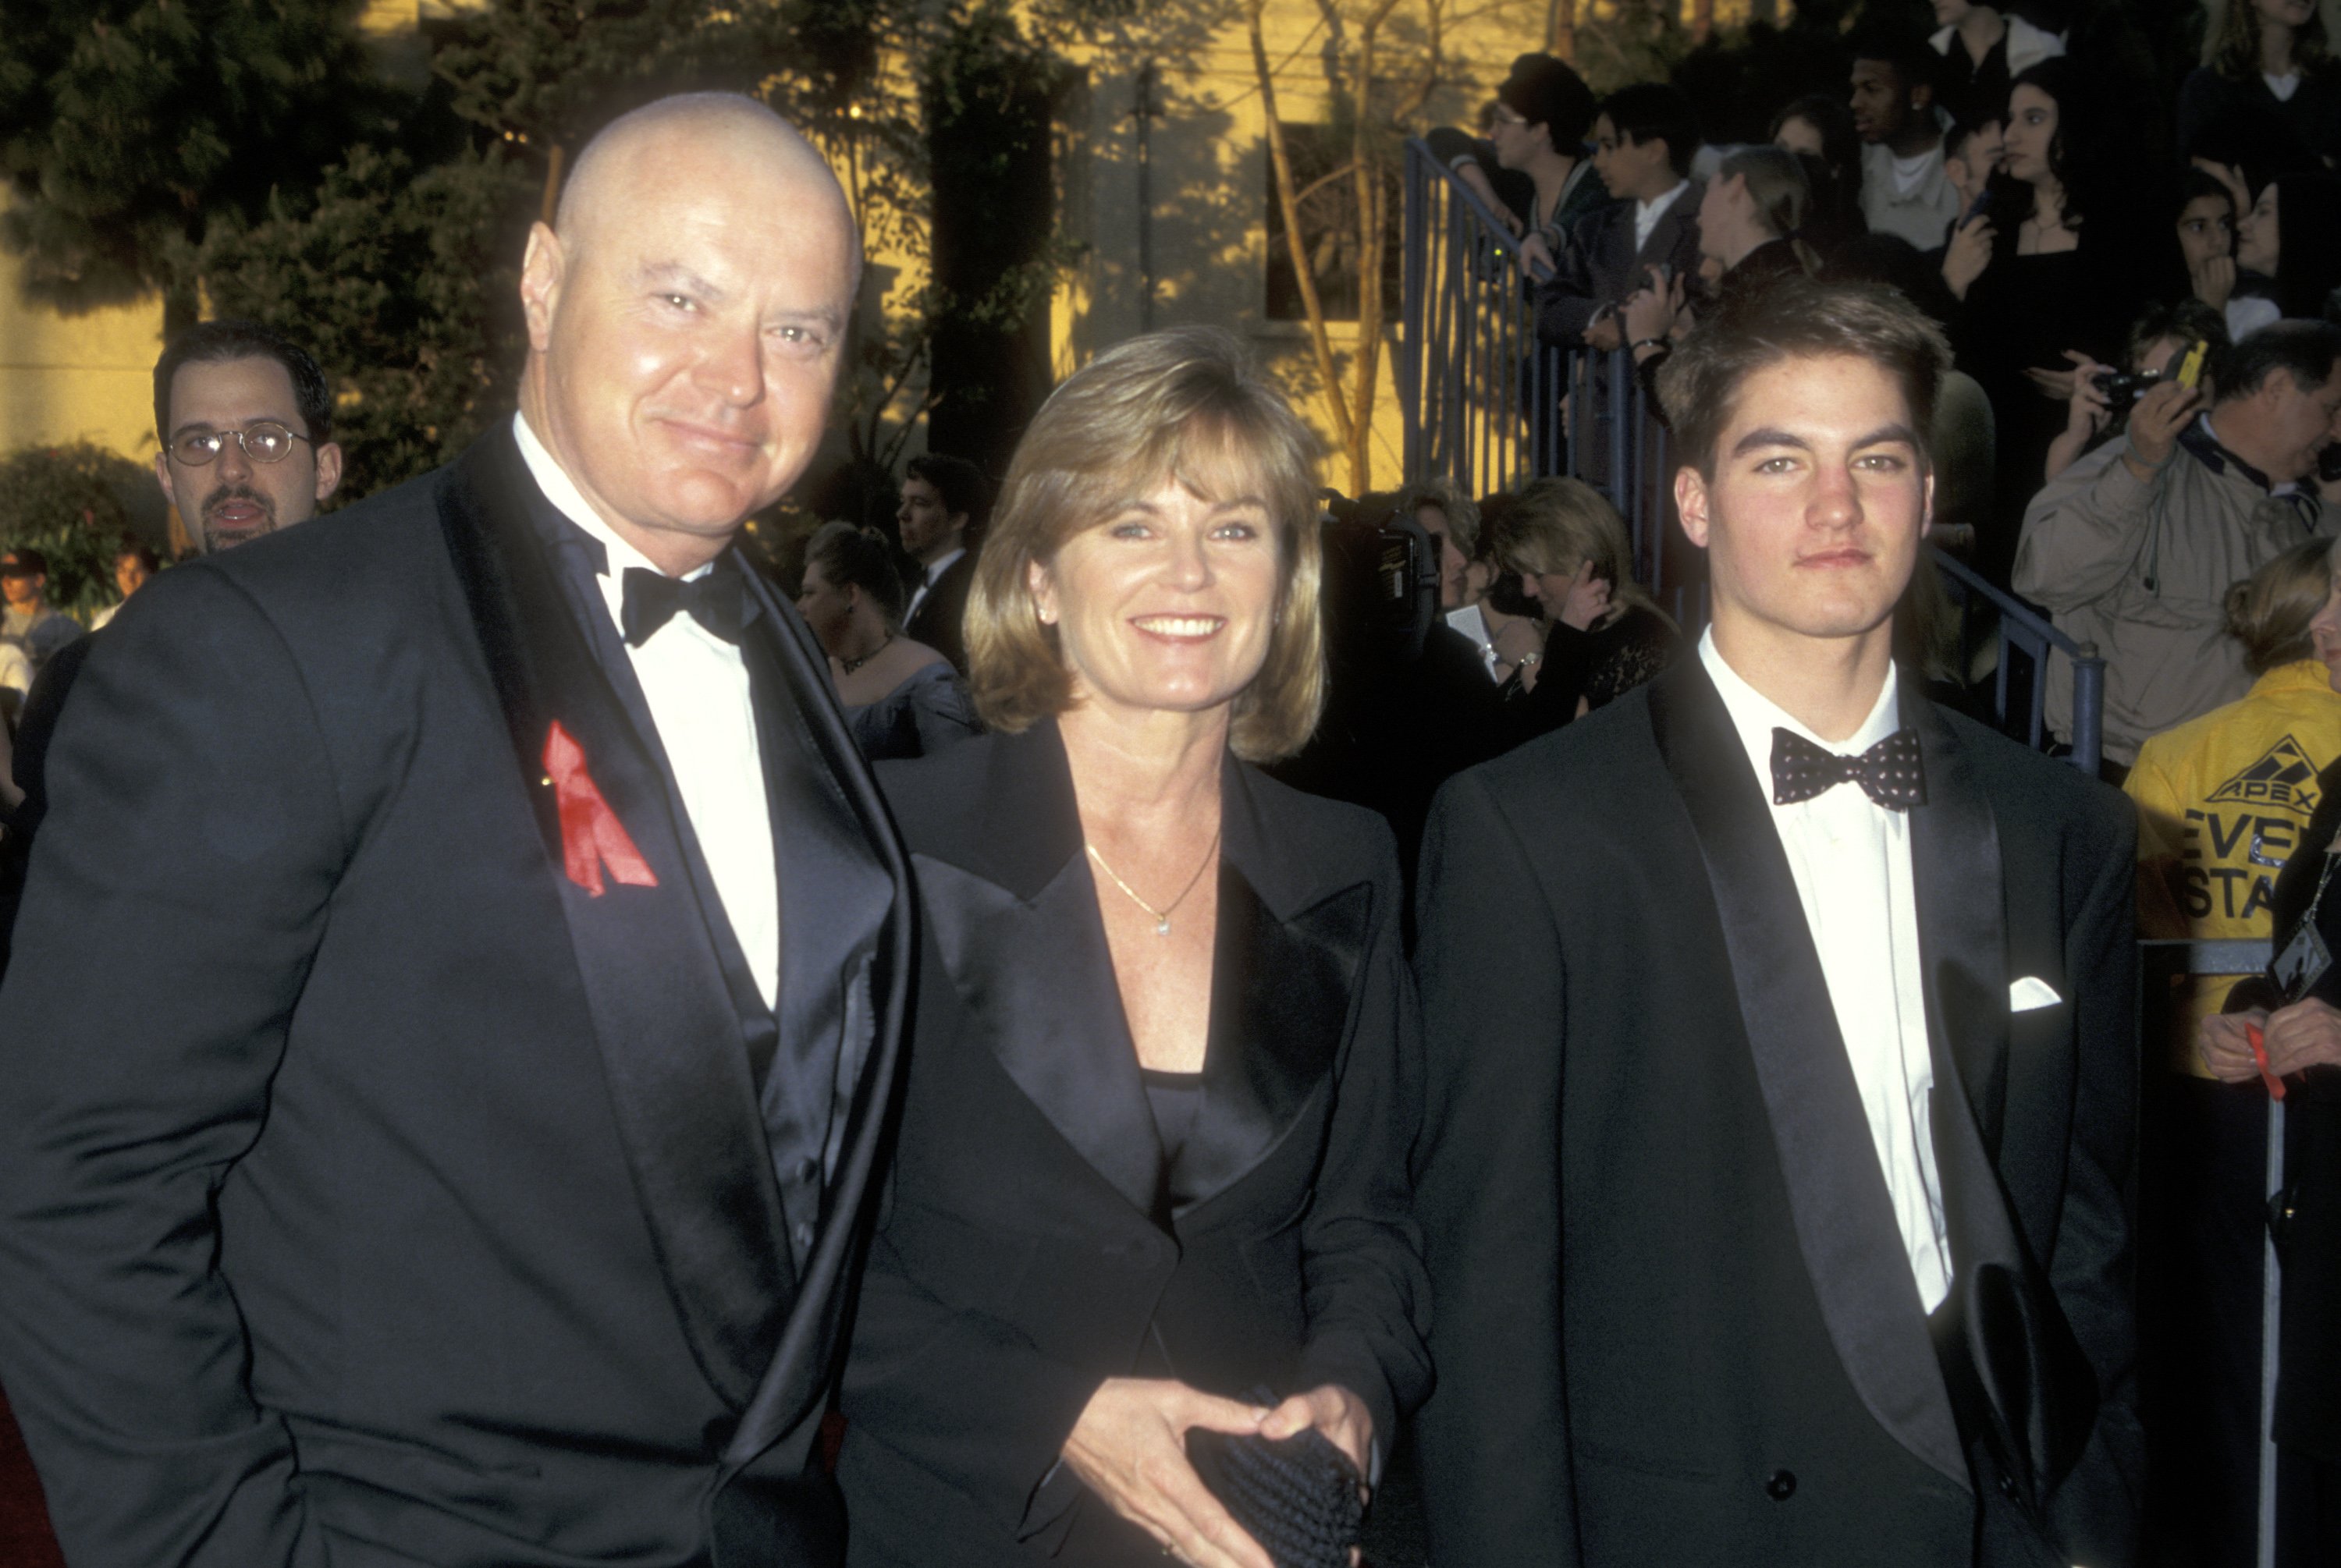 Robert Urich, wife Heather Menzies, and son Ryan Urich attend the Third Annual Screen Actors Guild Awards on February 23, 1997  | Source: Getty Images